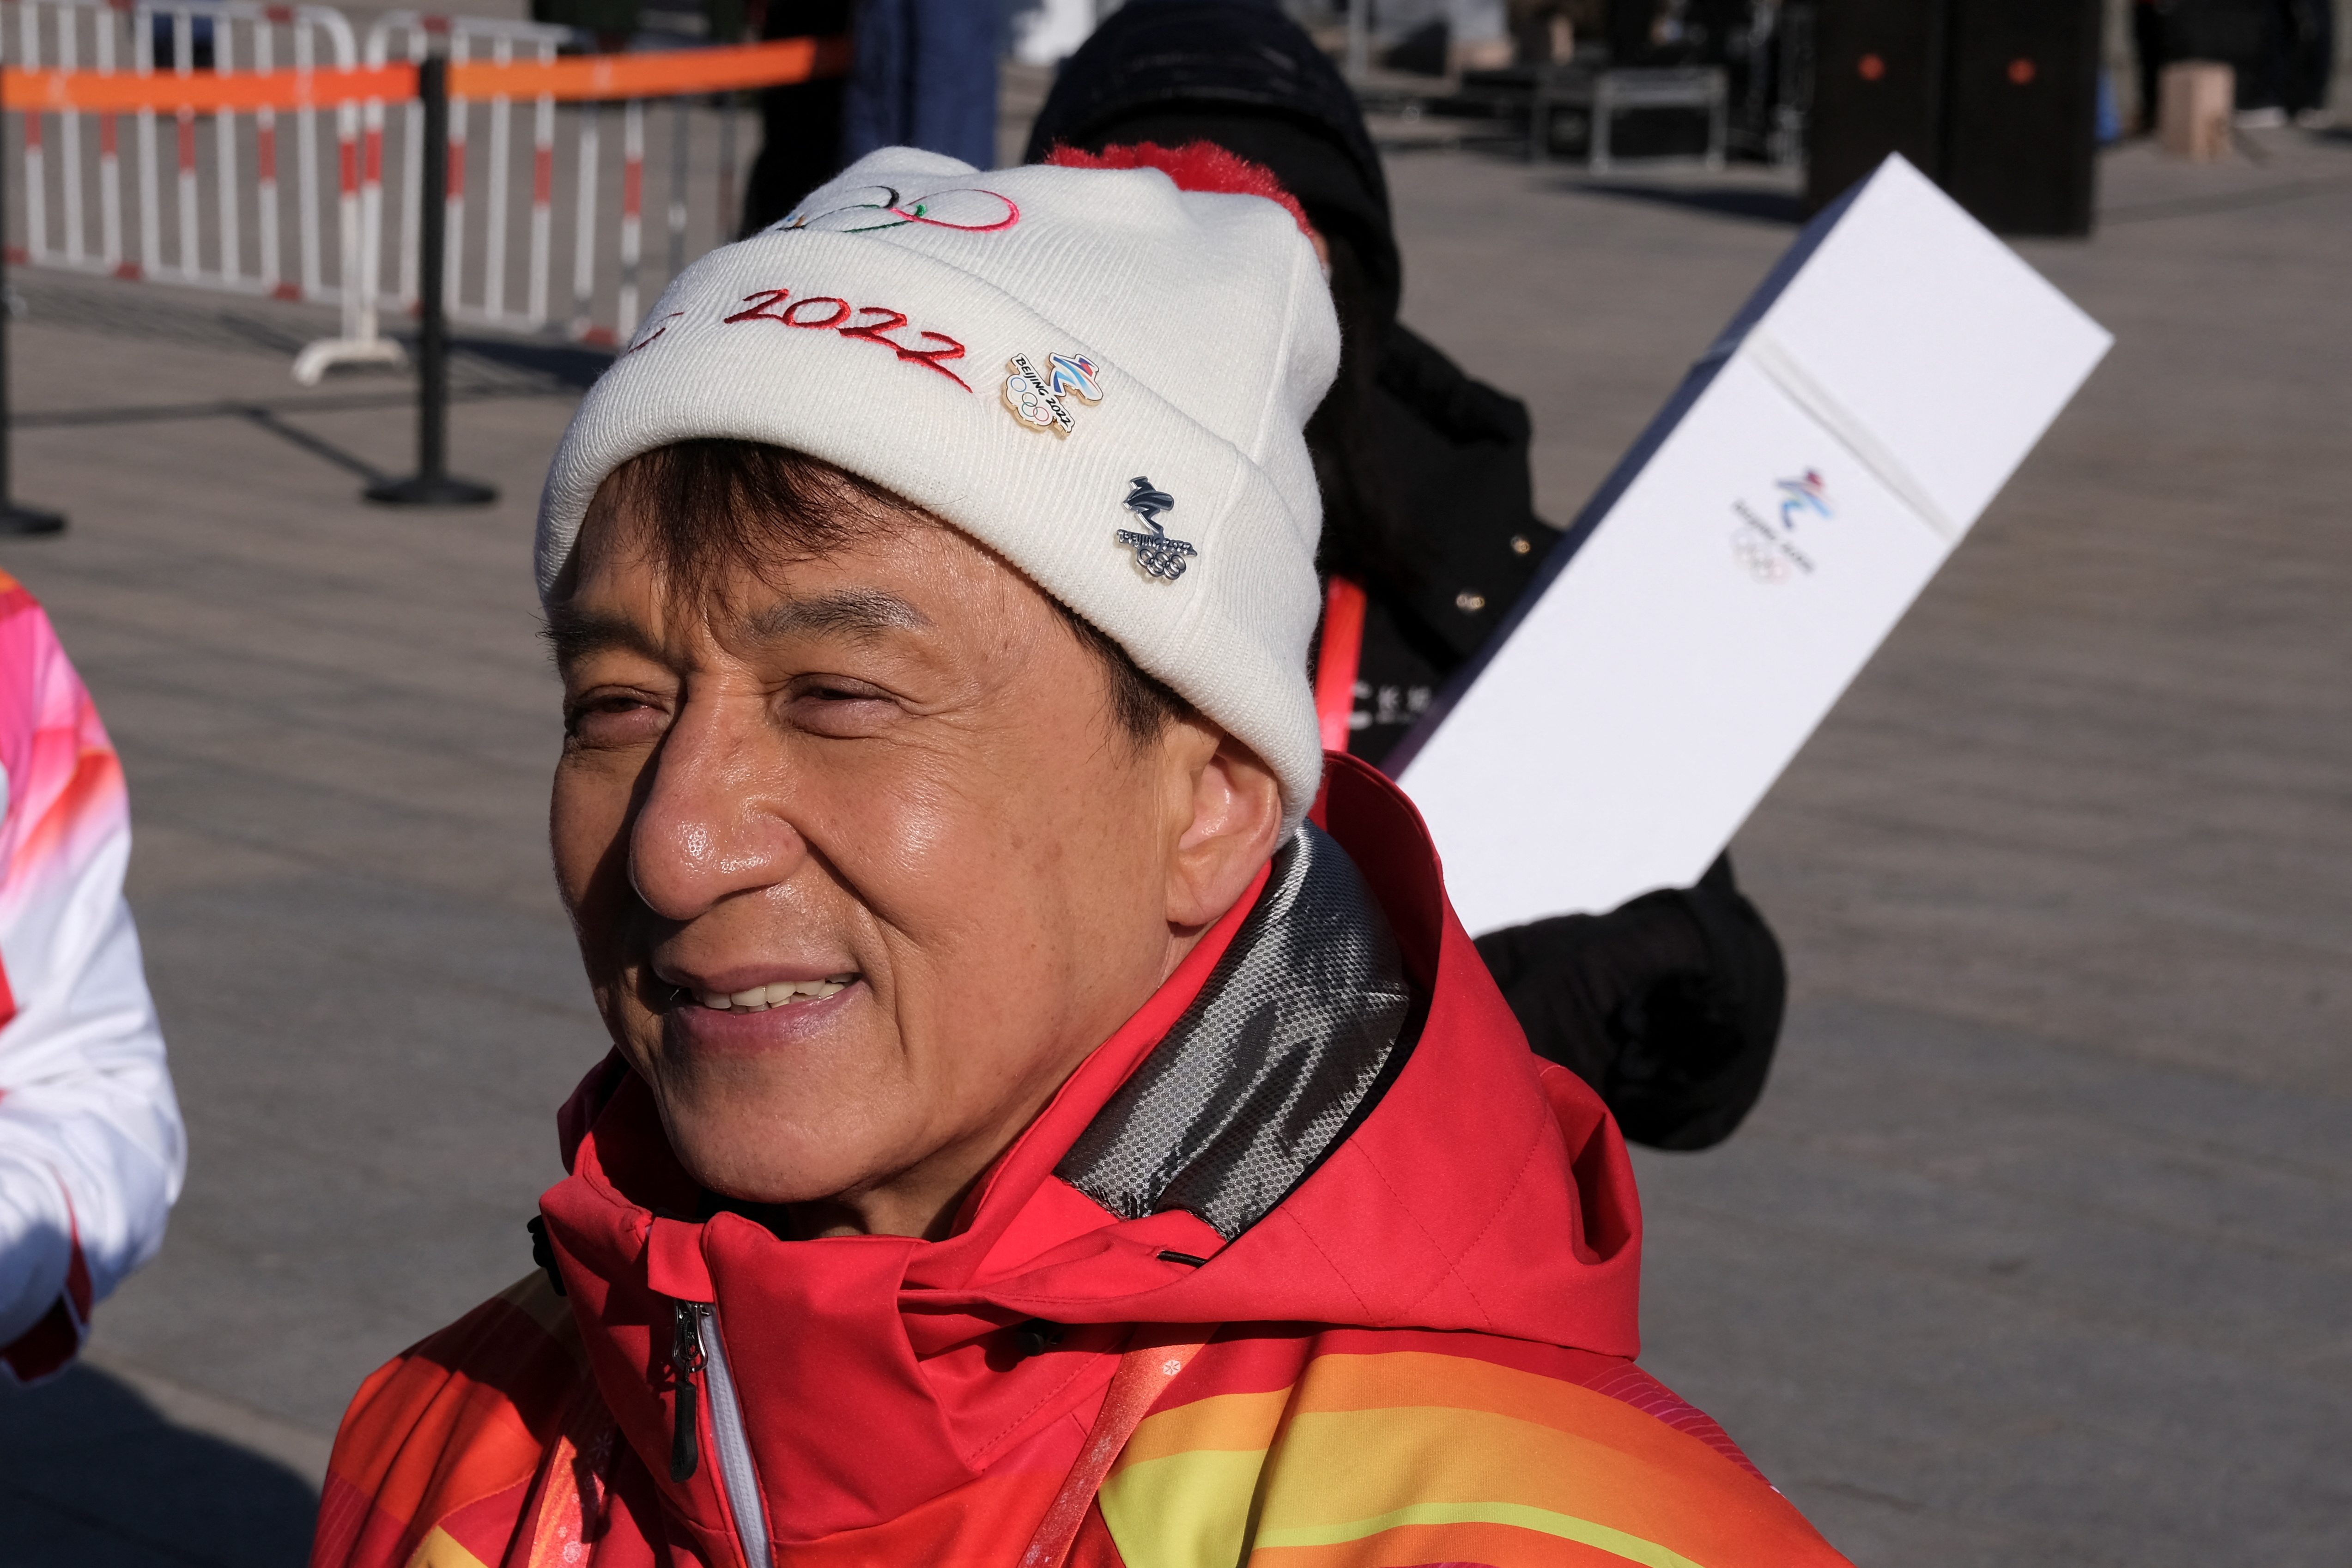 Beijing 2022 Winter Olympic Games - Torch Relay